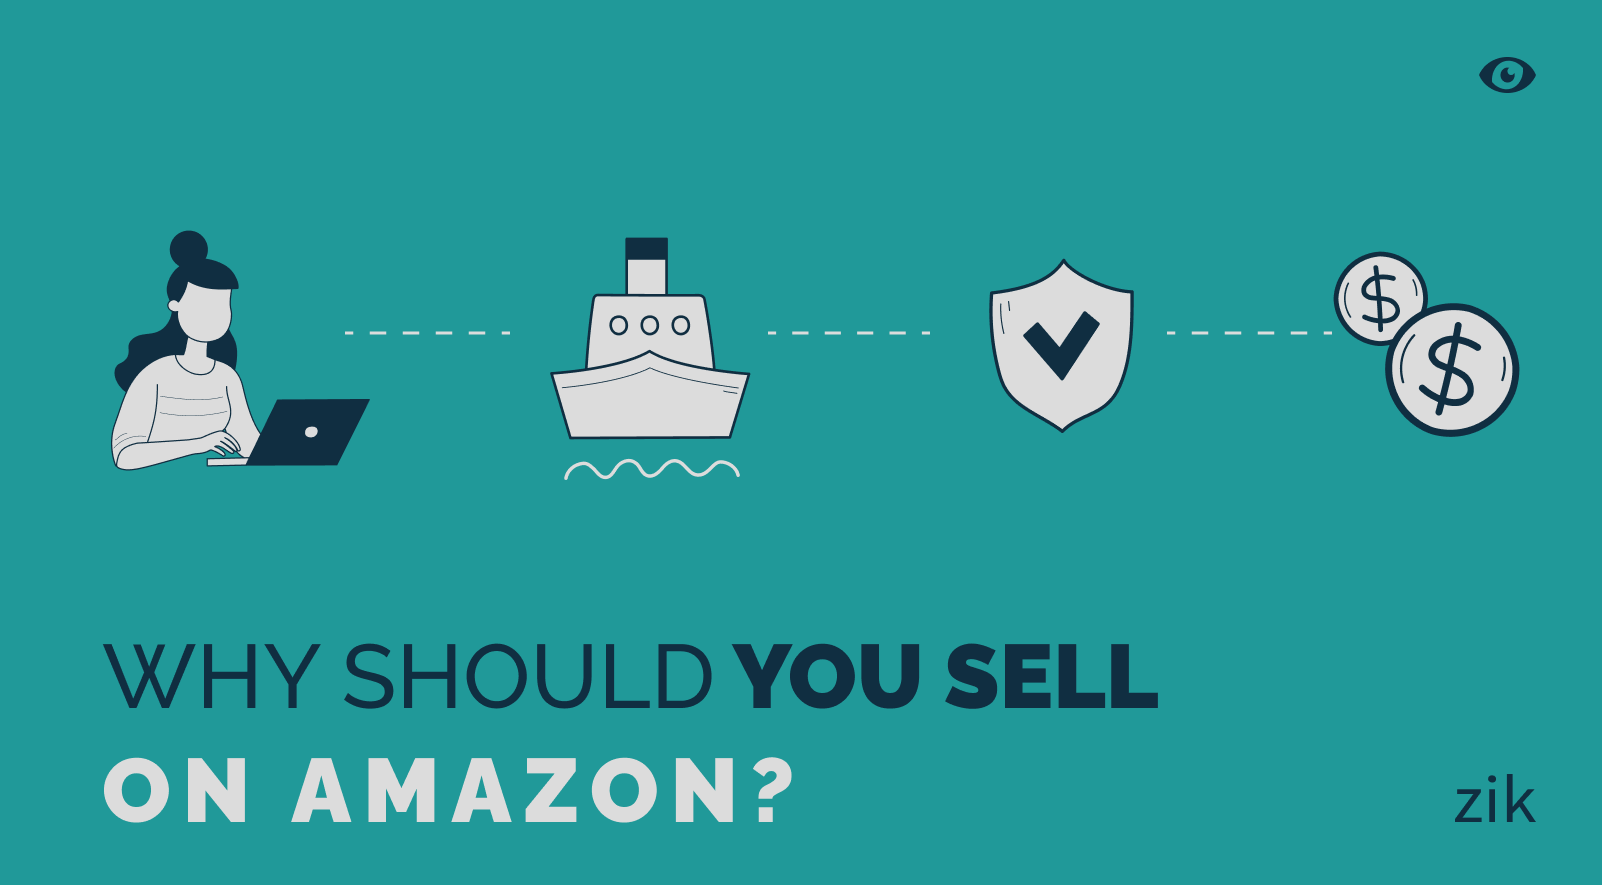 Why should you sell on Amazon